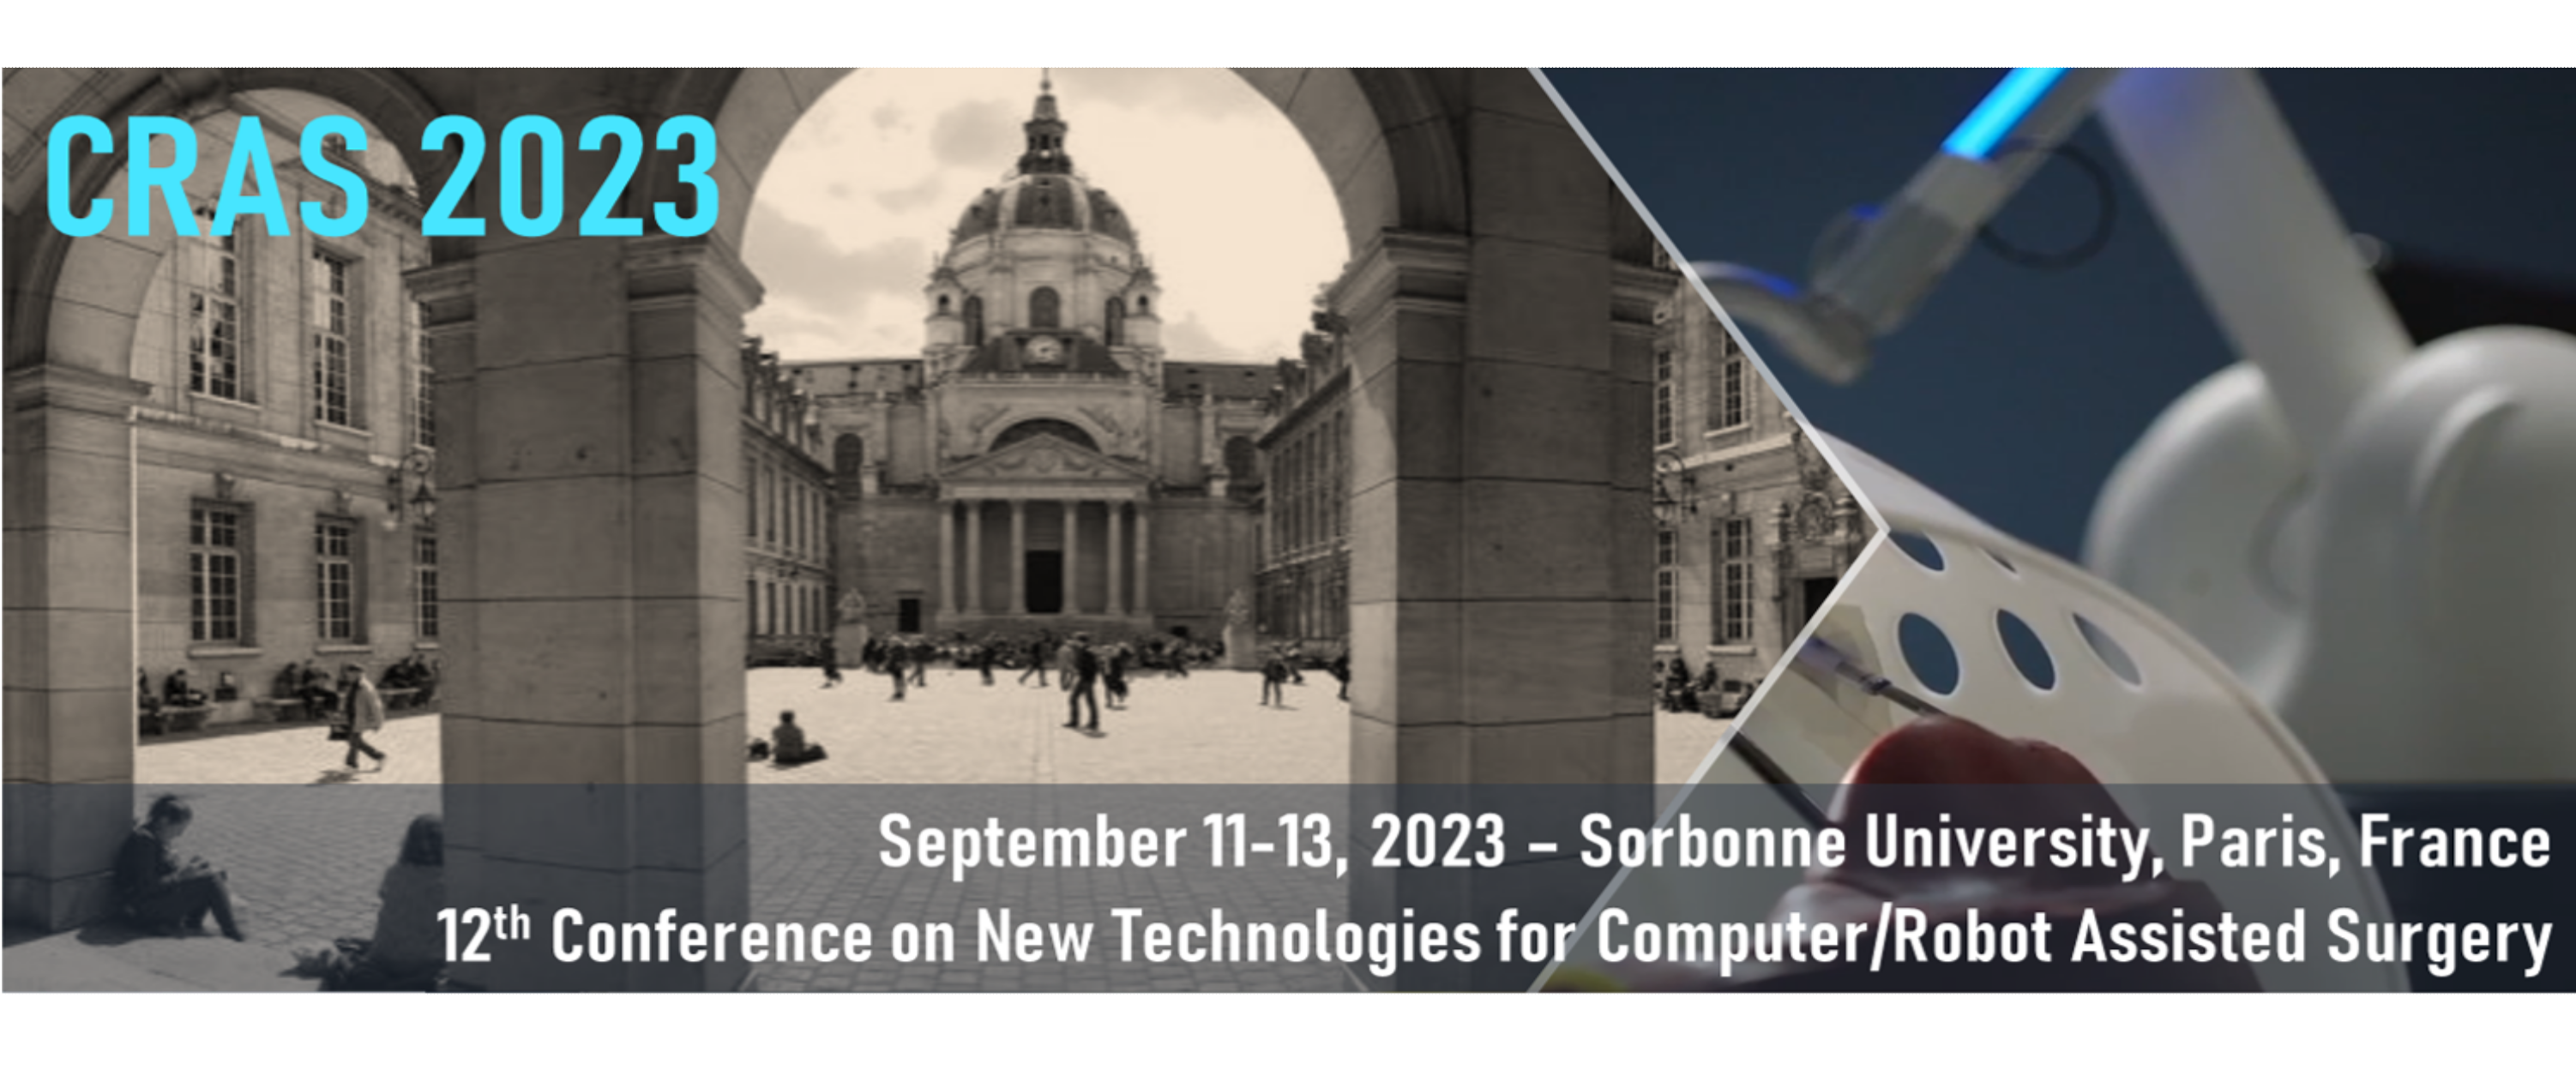 12th CRAS in Sorbonne University from 11 to 13 september 2023